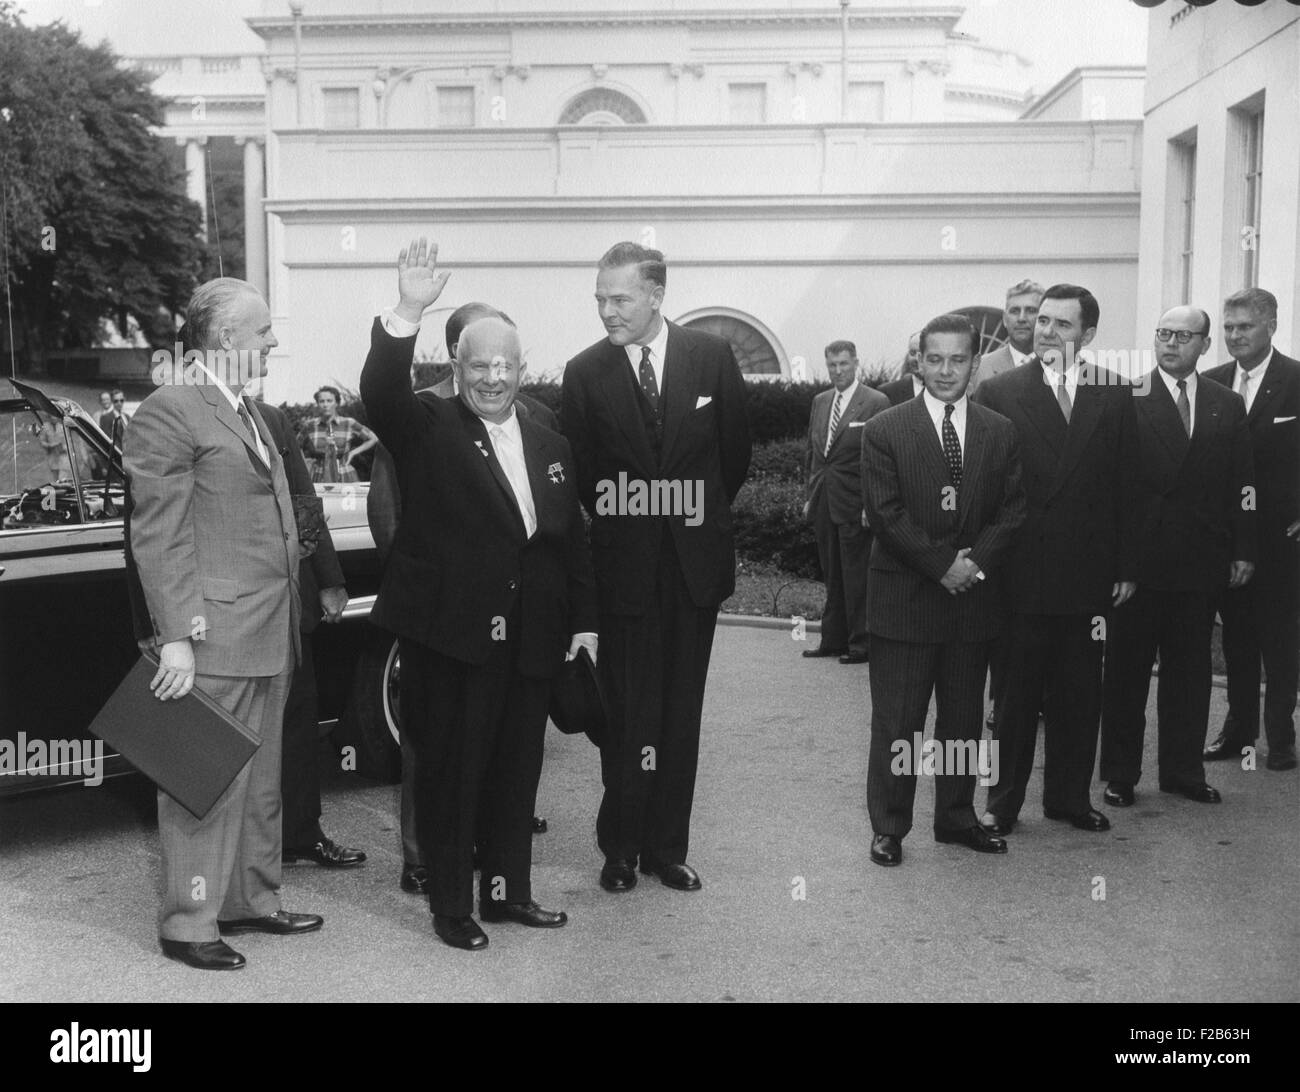 Soviet Premier Nikita Khrushchev waves as he arrives at the White House, Sept. 15, 1959. To his left is U.S. Ambassador to the UN, Henry Cabot Lodge. USSR Minister of Foreign Affairs, Andrei Gromyko, is third from right. - (BSLOC 2014 16 146) Stock Photo